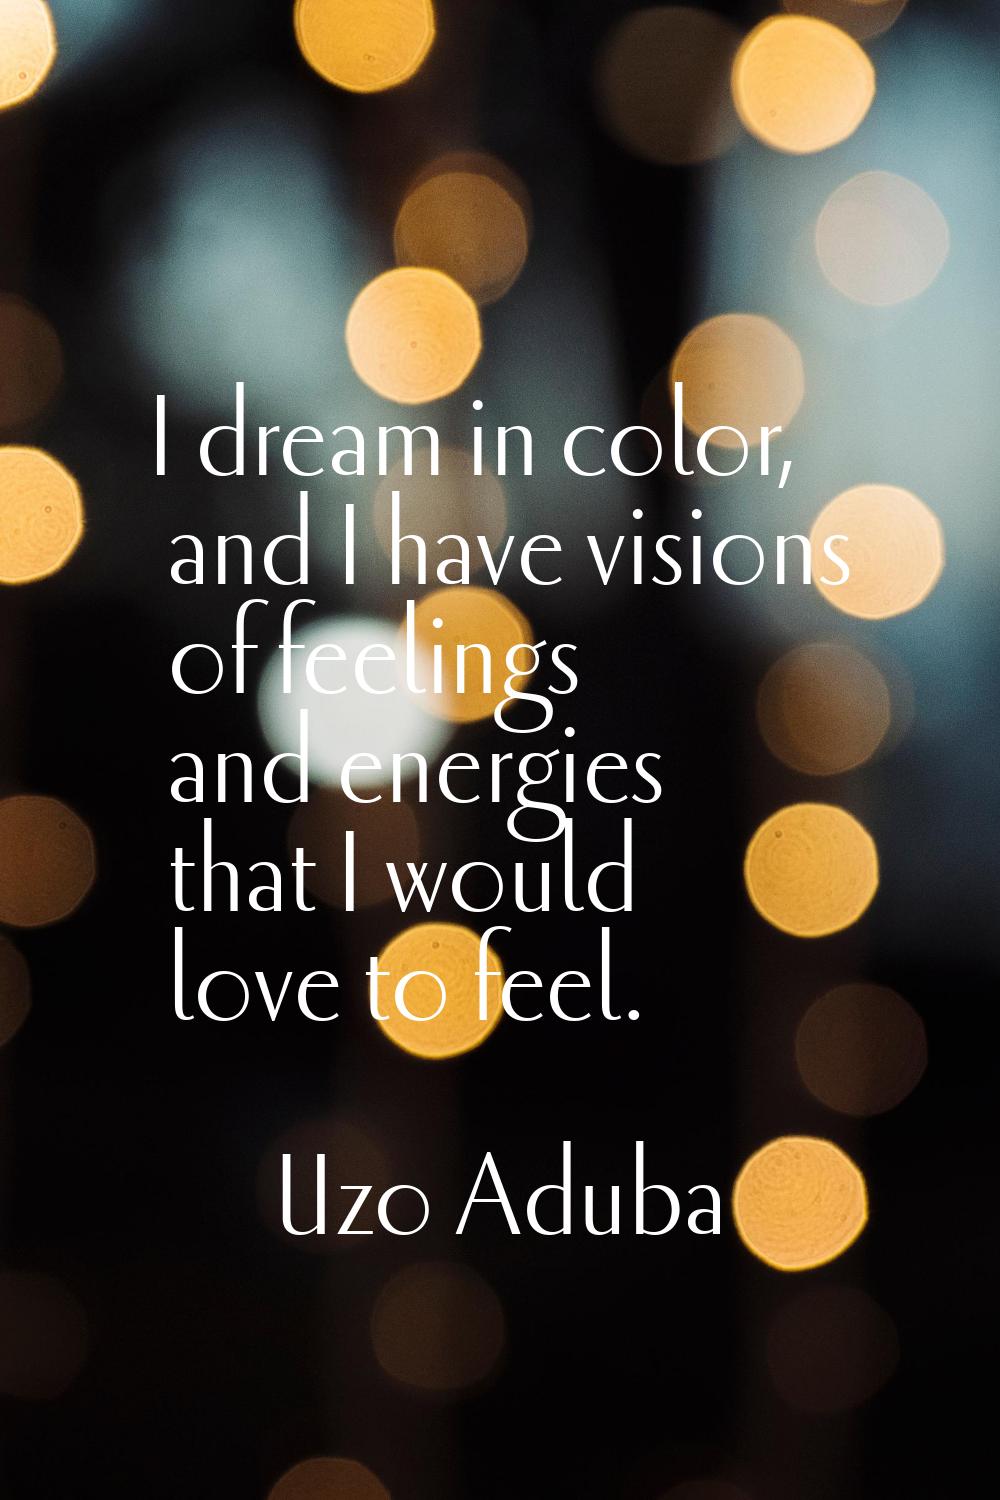 I dream in color, and I have visions of feelings and energies that I would love to feel.